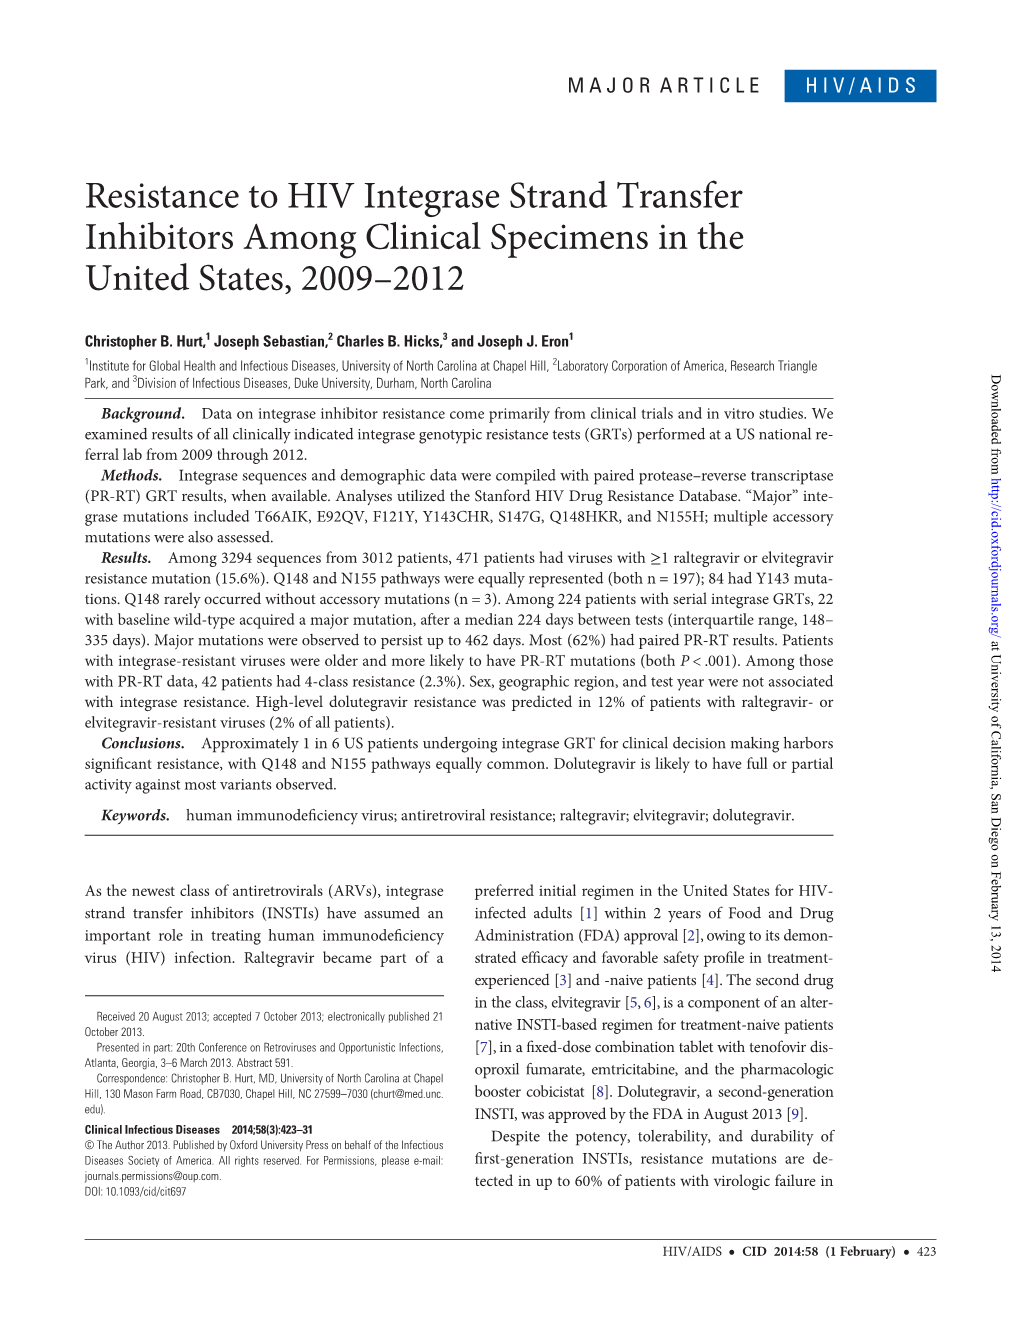 Resistance to HIV Integrase Strand Transfer Inhibitors Among Clinical Specimens in the United States, 2009–2012